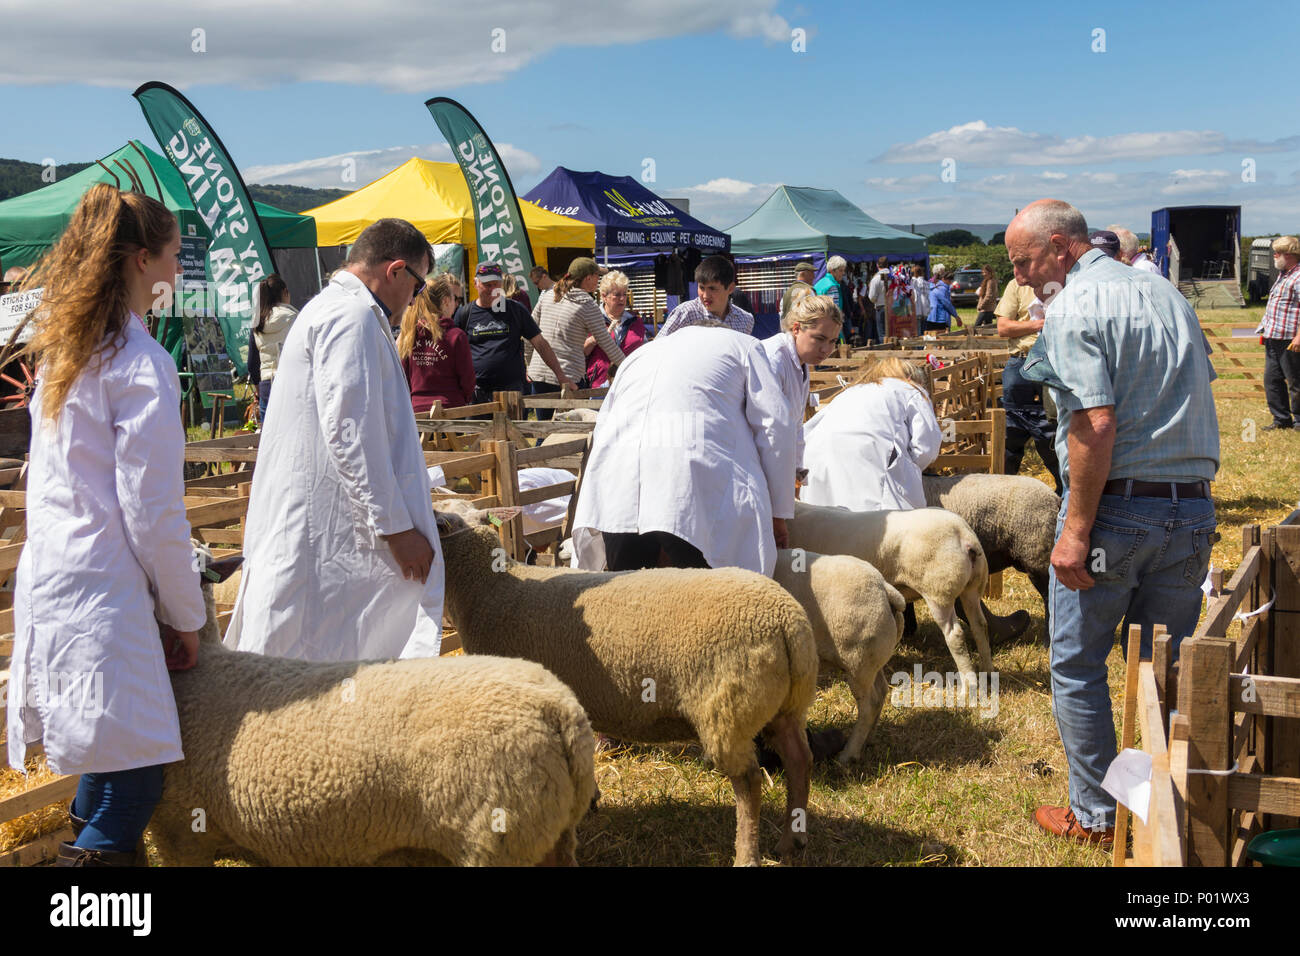 A show judge deliberates on the merits of sheep entered into one of the show classes  at the Arthington Show, West Yorkshire in 2017. Stock Photo